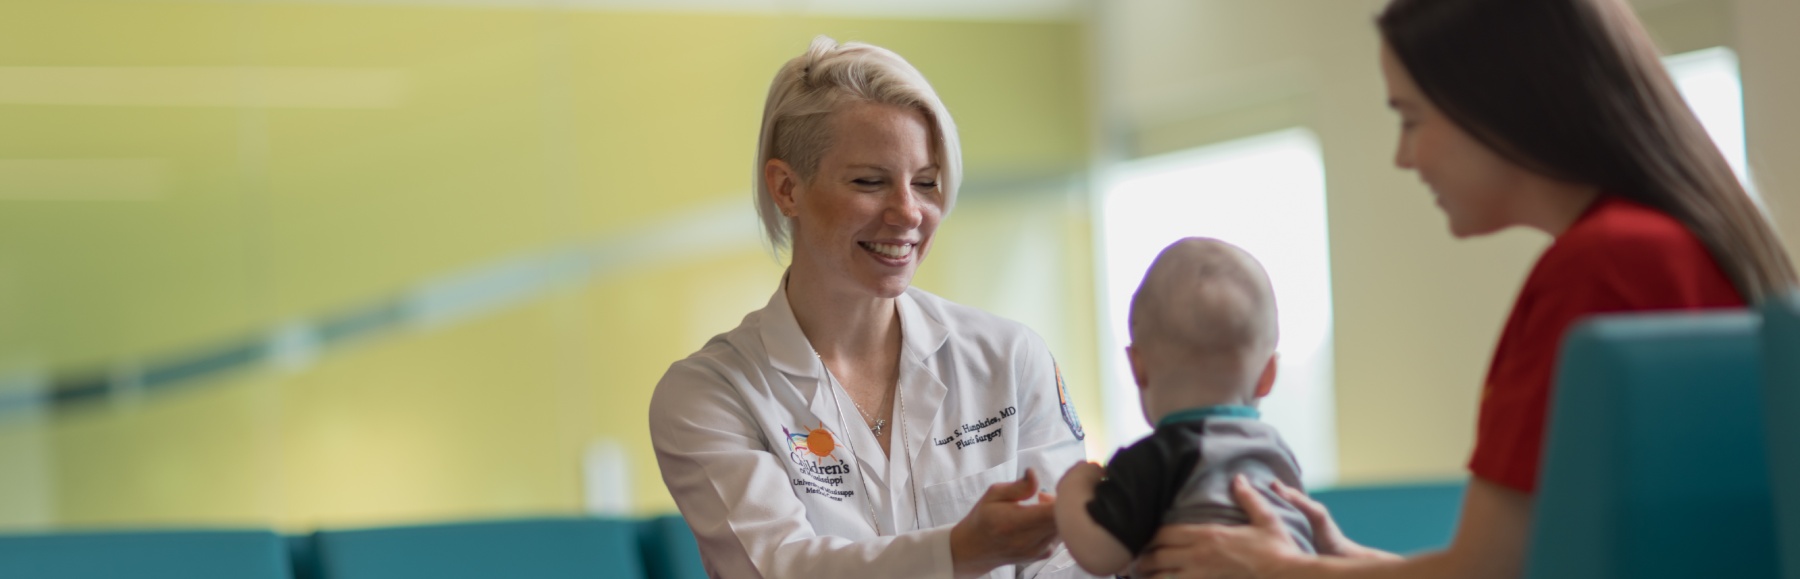 Medical Provider smiles while reaching out to baby.